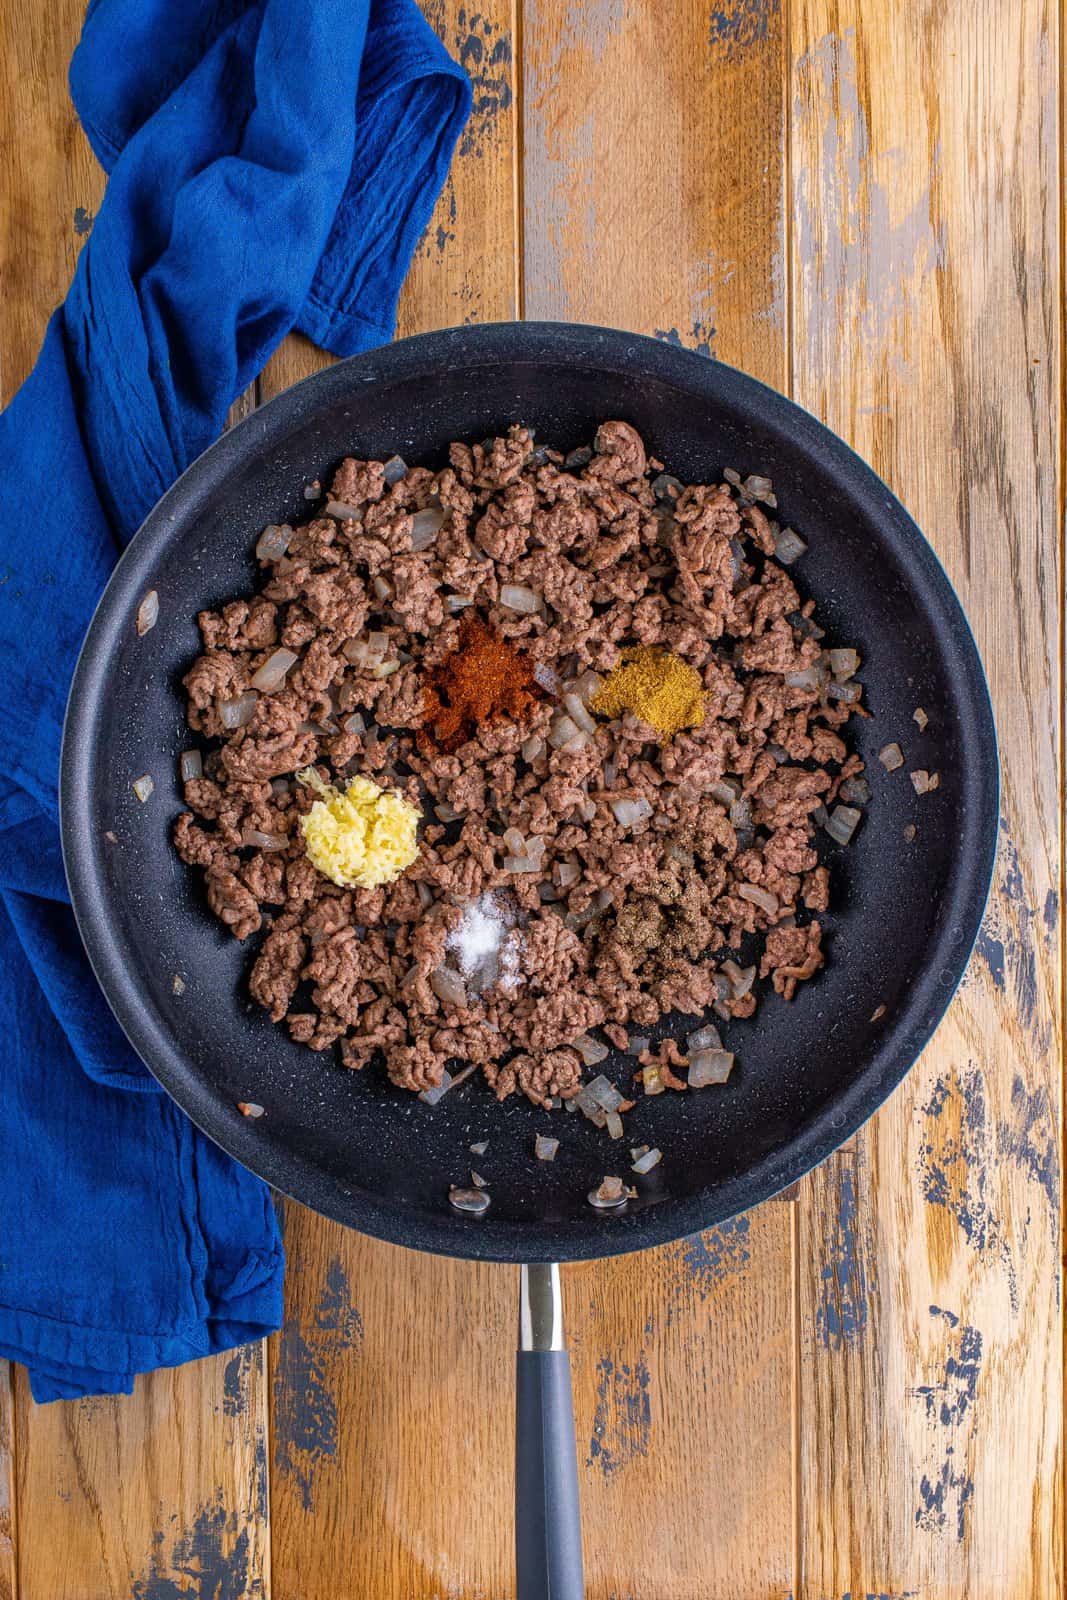 taco seasonings and garlic added to cooked ground beef in skillet.